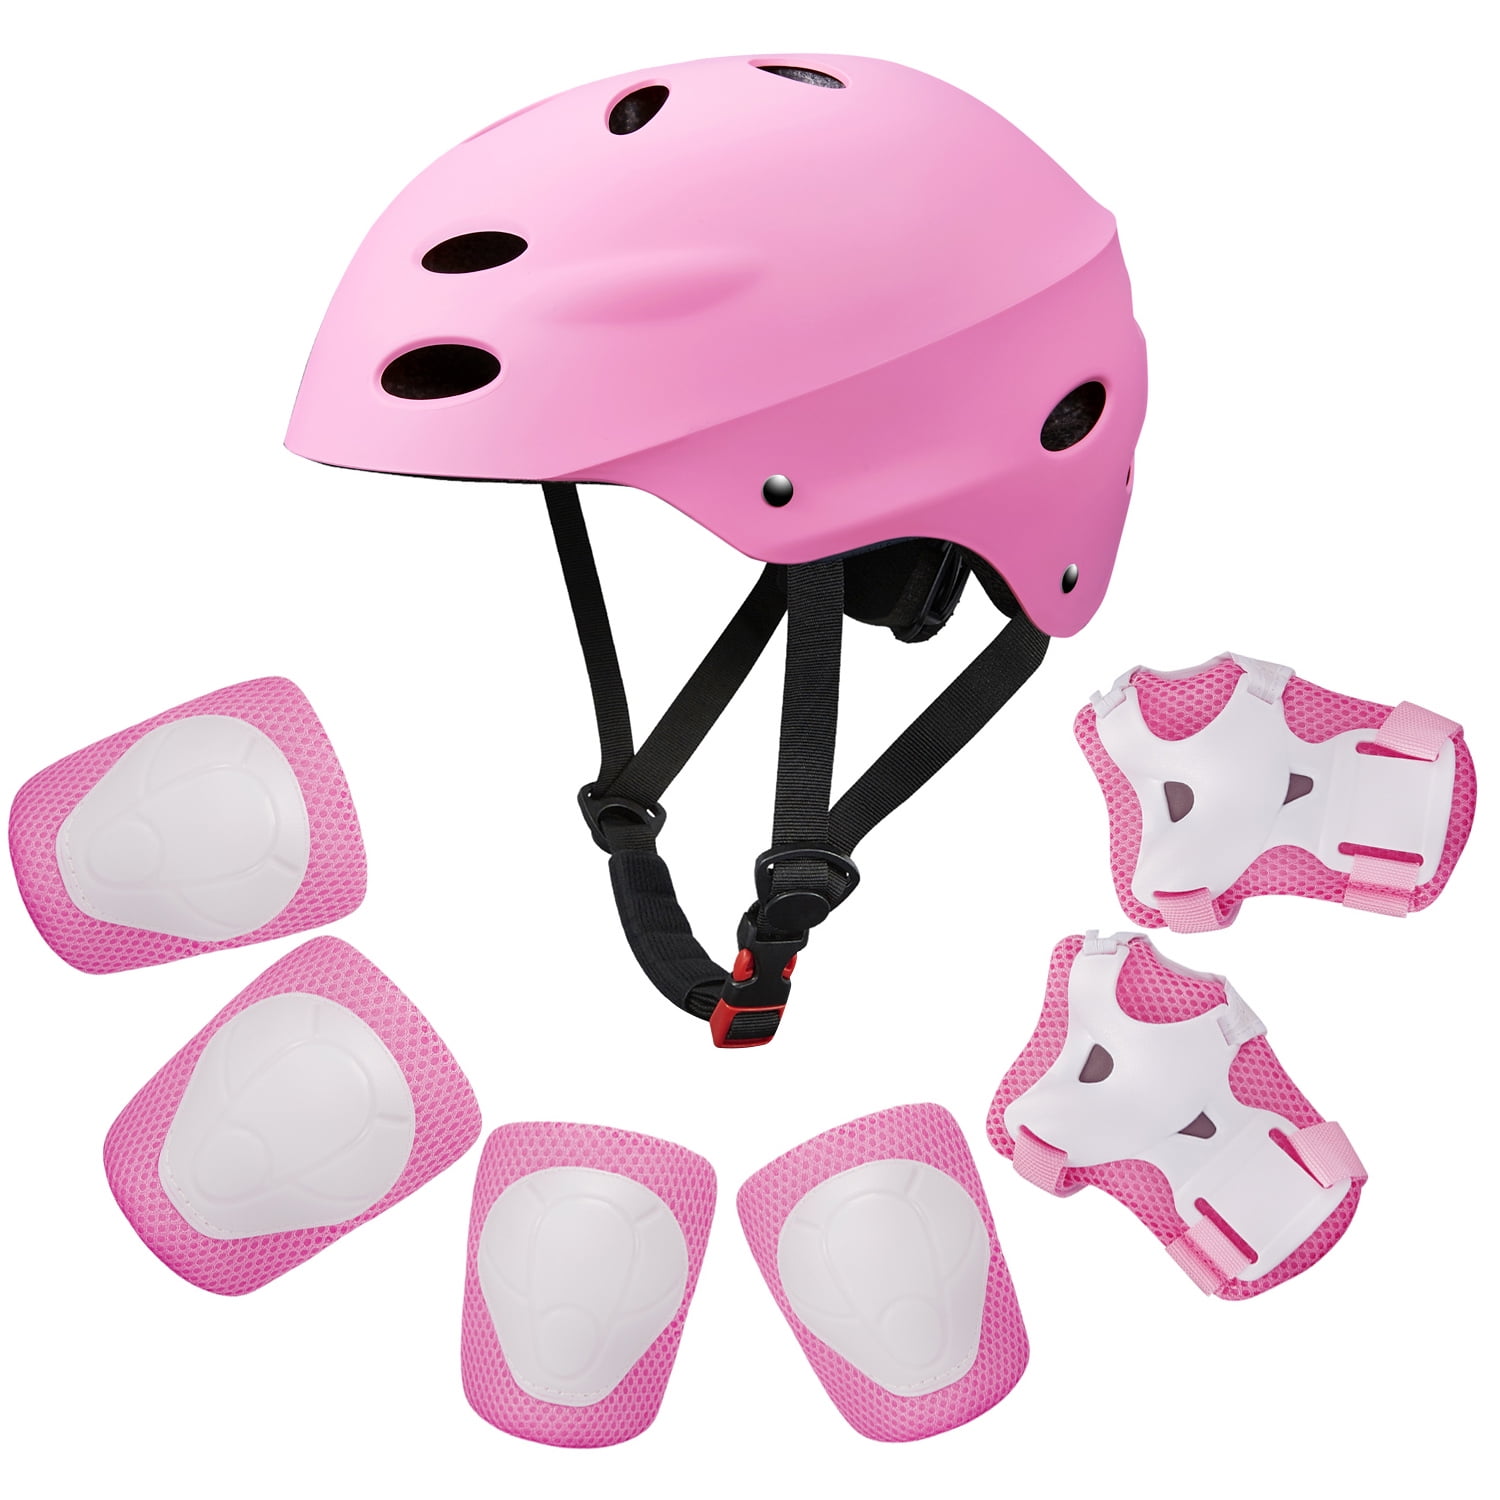 Junior Sports Helmet Head Protect Gear Skateboard Scooter Cycling ect 